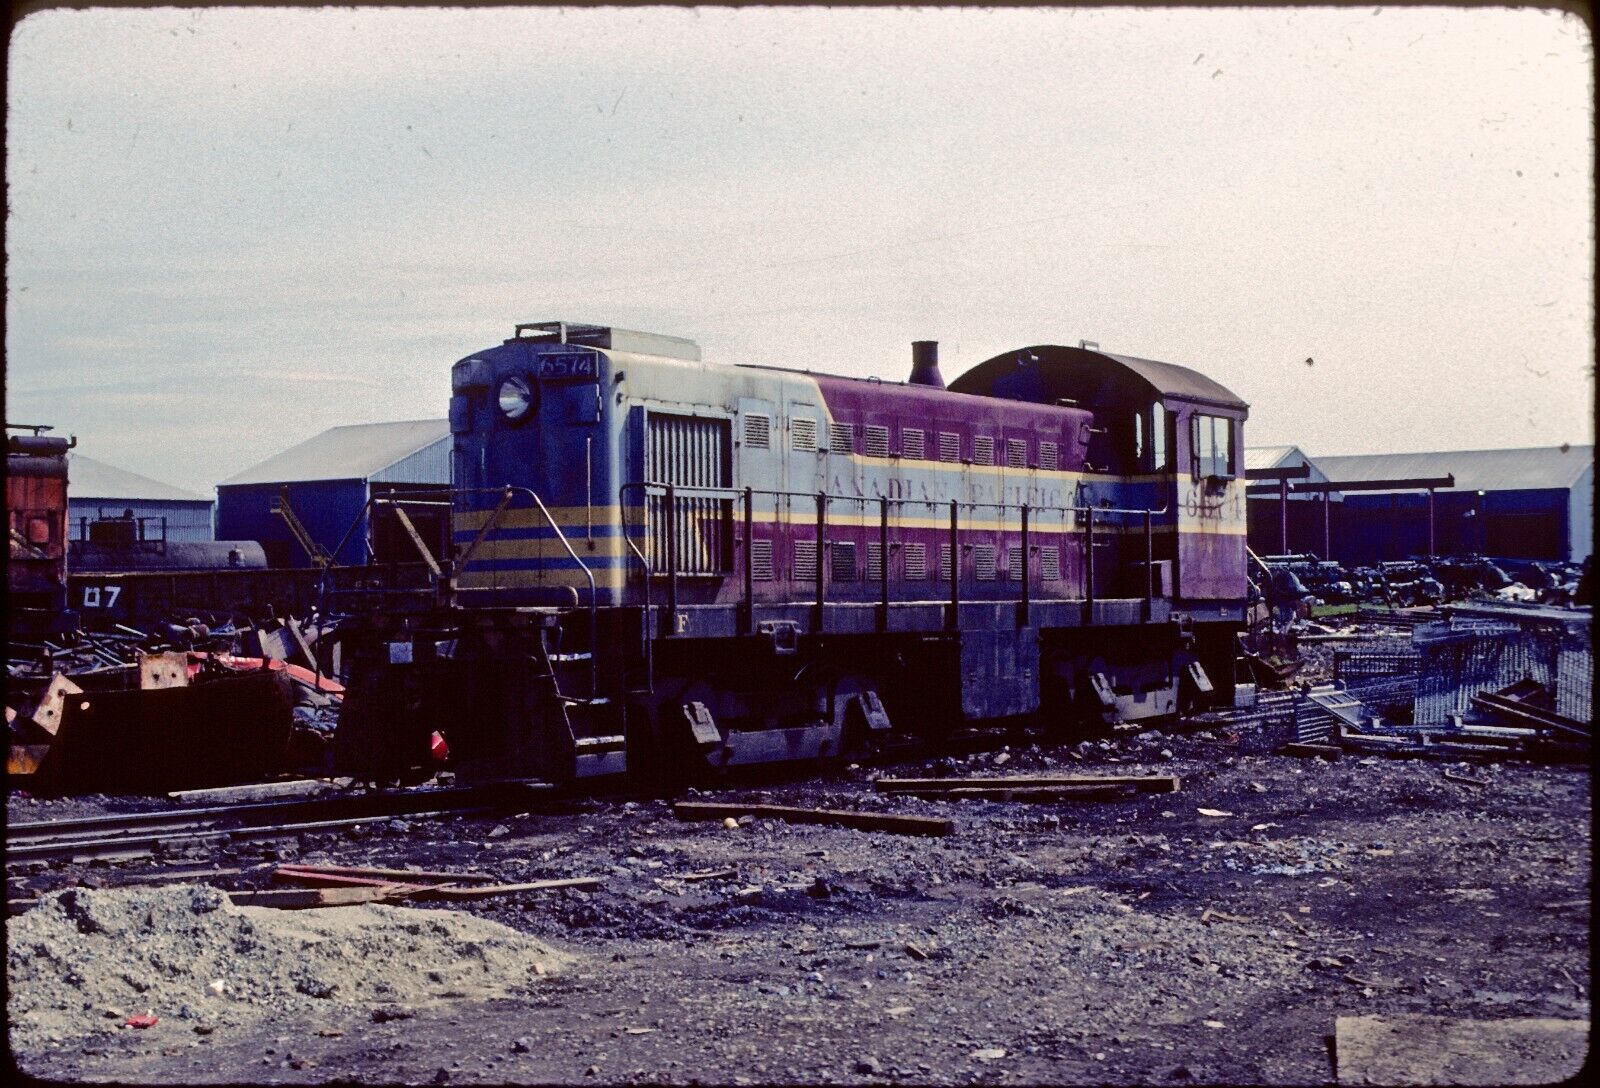 RM51 - Colour Slide Canadian Pacific Locomotive #6574 at Western Canada Steel